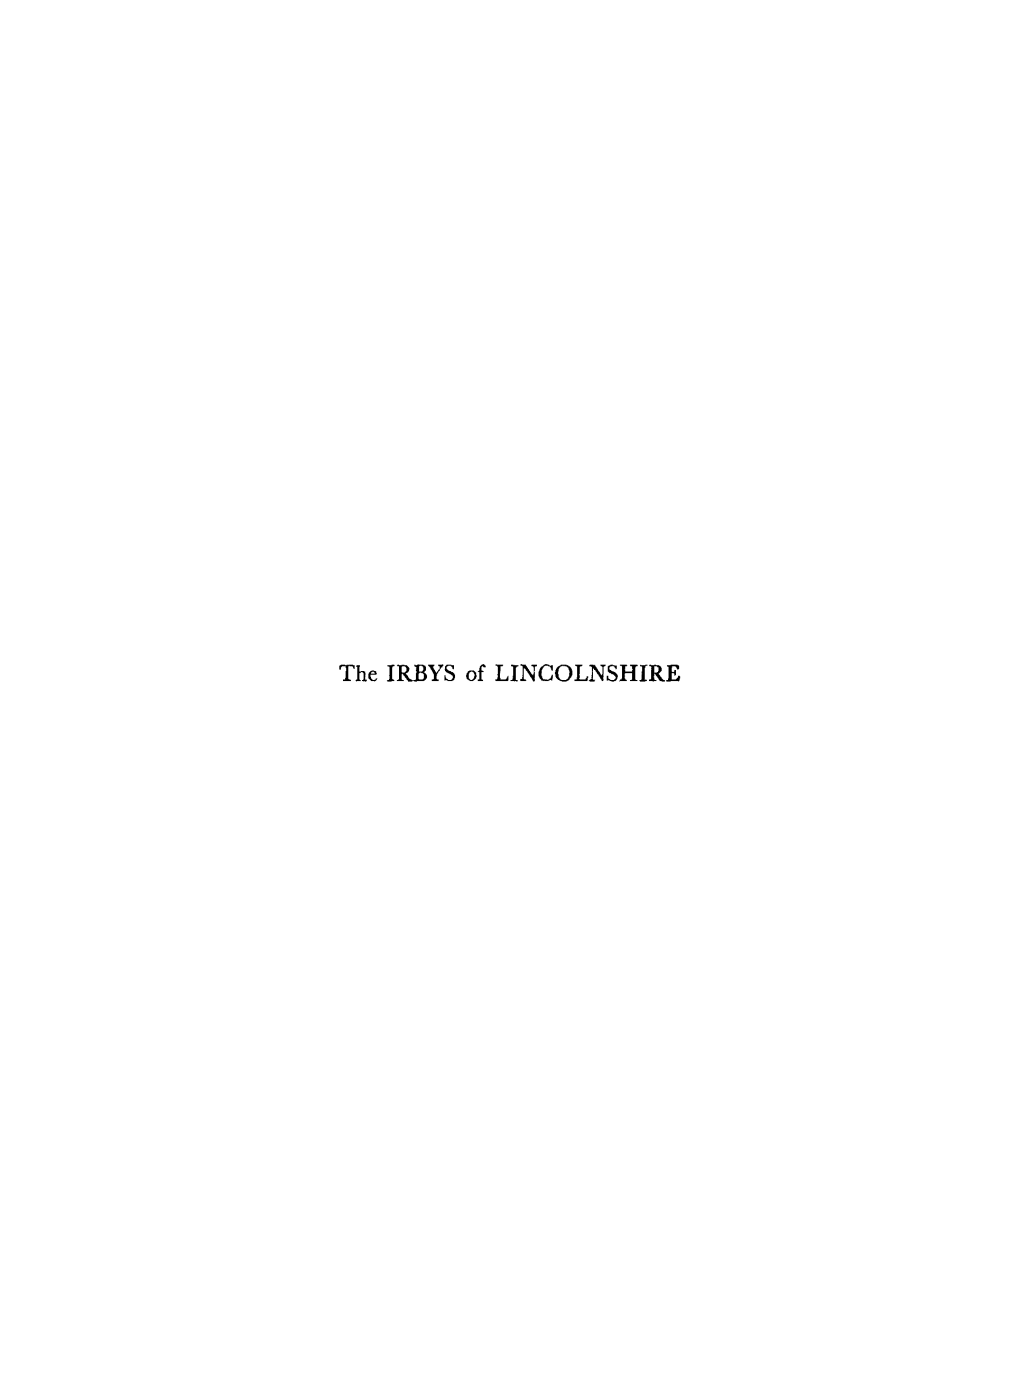 The IRBYS of LINCOLNSHIRE LINCOLNSHIRE IRBY Arl'iis the IRBYS of LINCOLNSHIRE and the IREBYS of CUMBERLAND